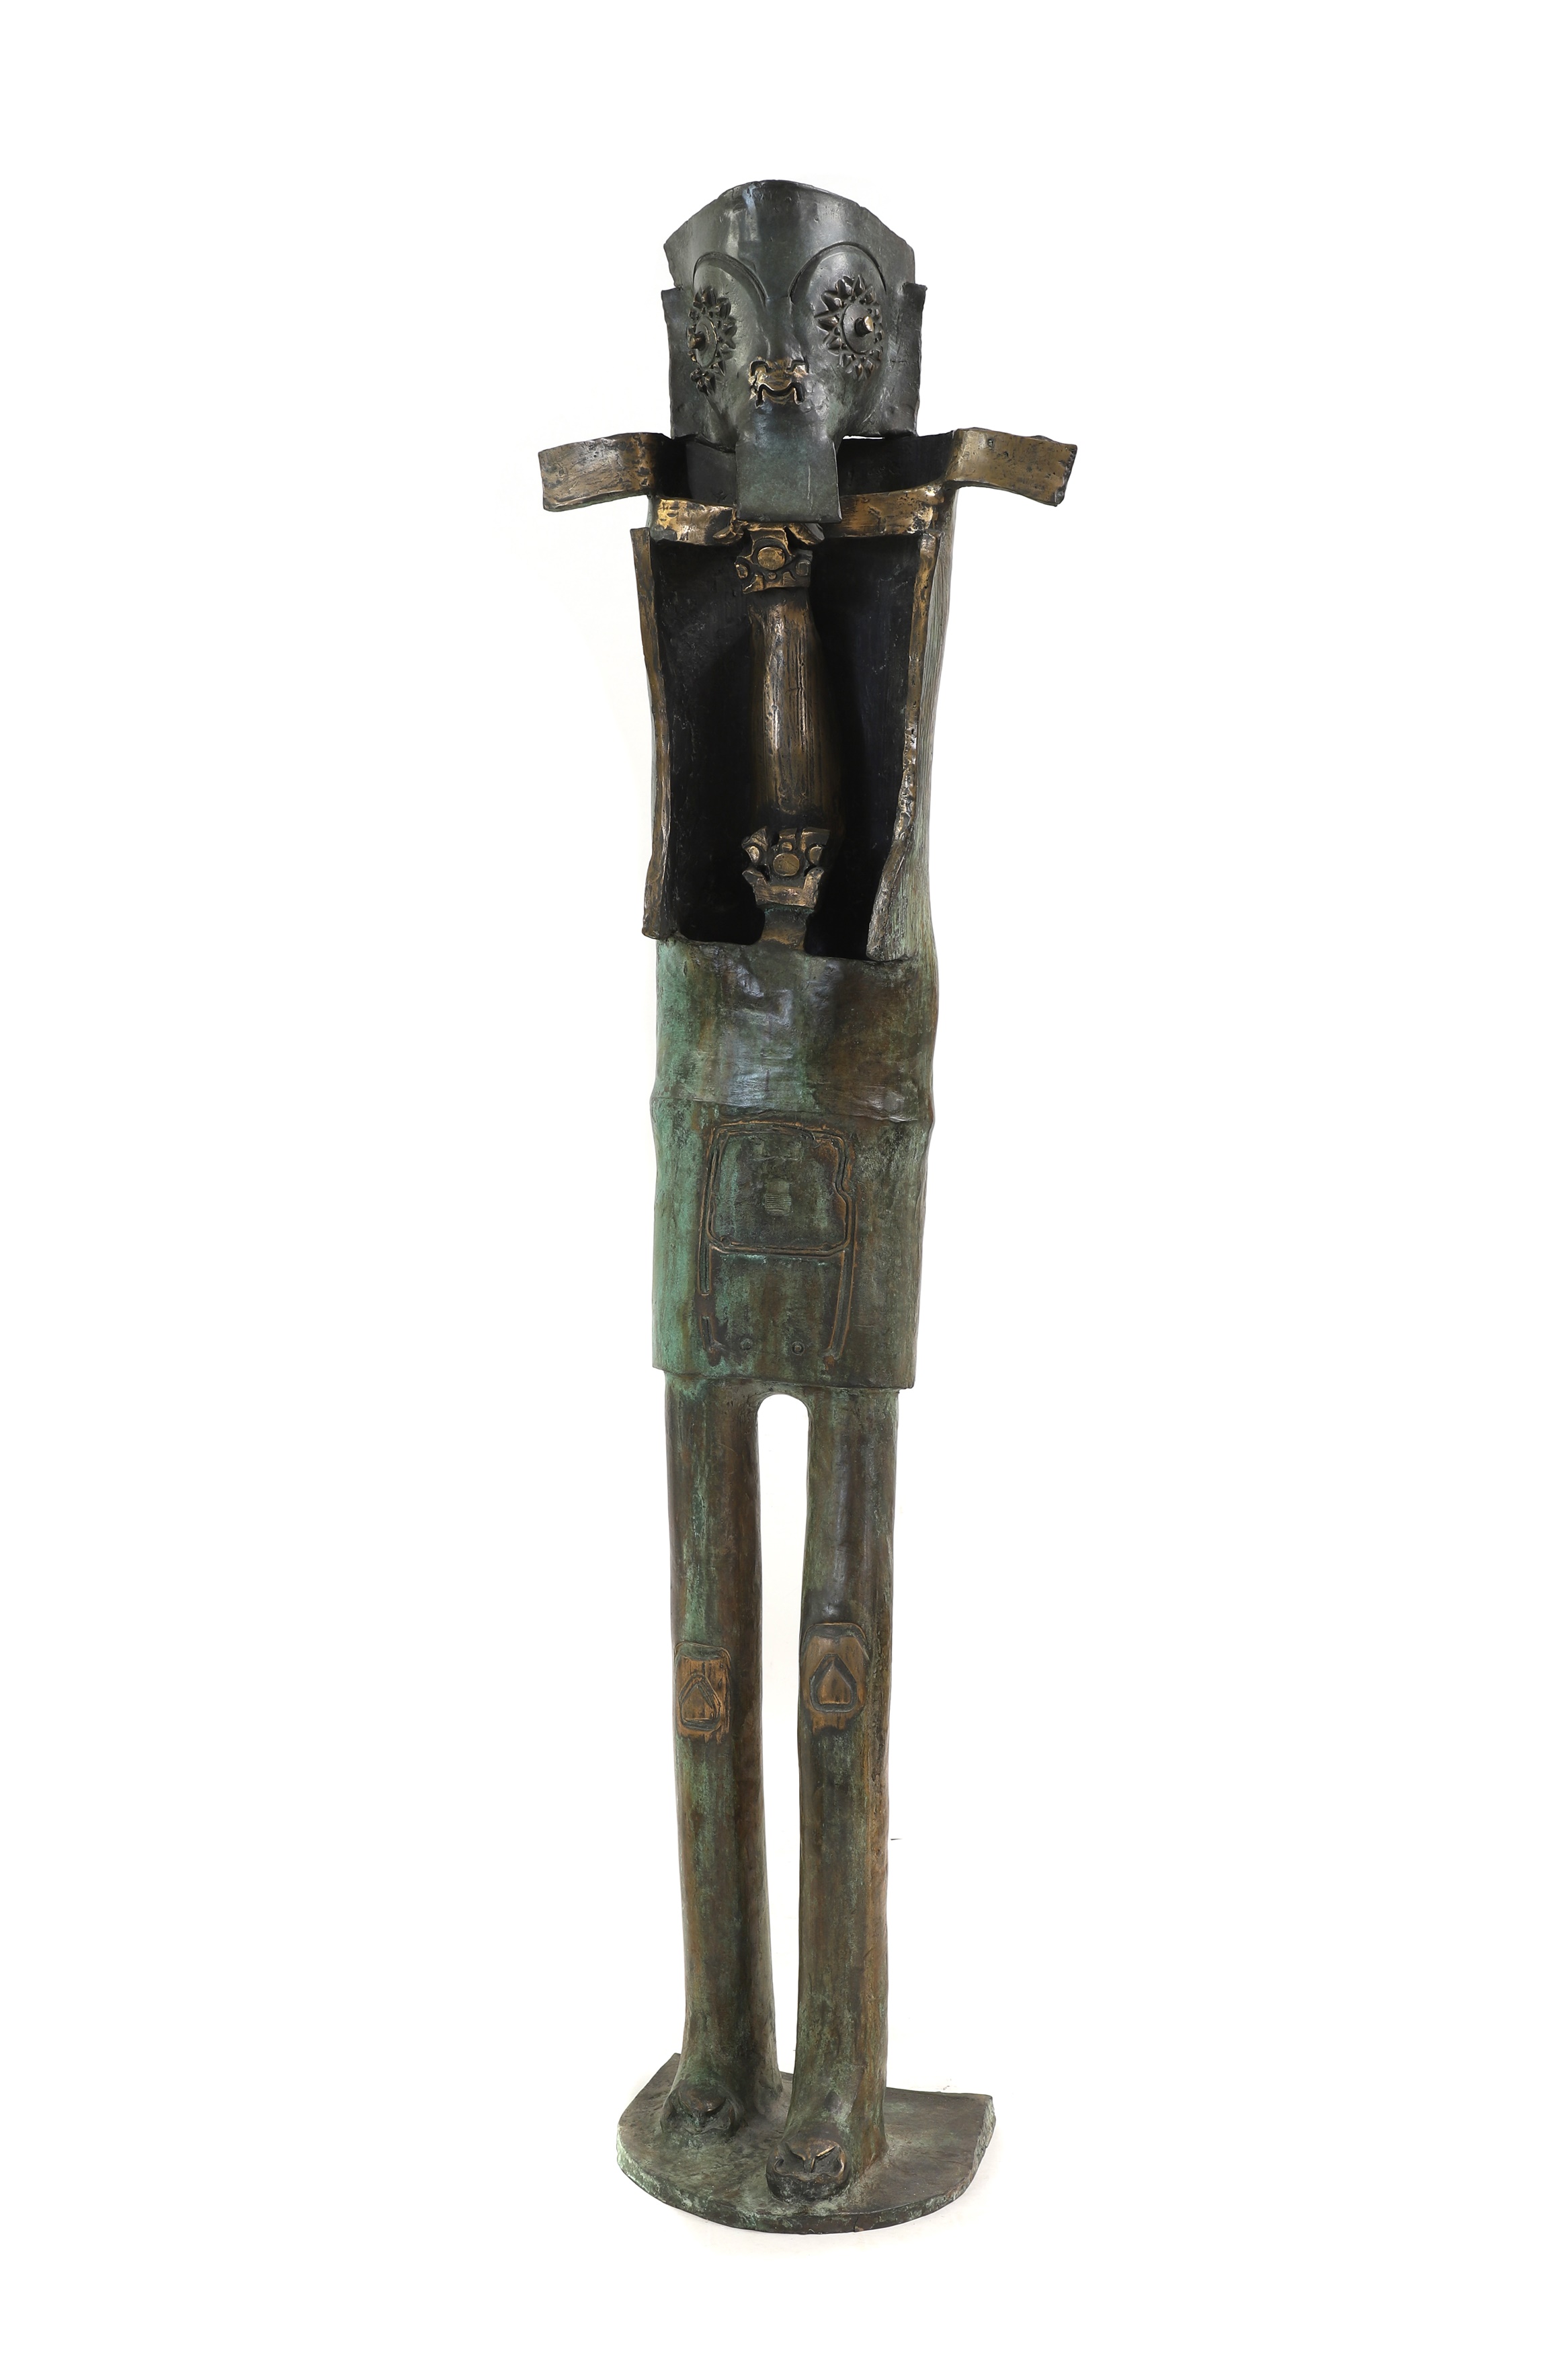 Roberto Matta (Chilean-Italian, 1911-2002) 'Absolux', 1991 bronze, signed, inscribed with title, 'Archive 91/14', 'Cera persa' (lost wax) and numbered 2/6 on base 162cm high (£7,000-10,000)